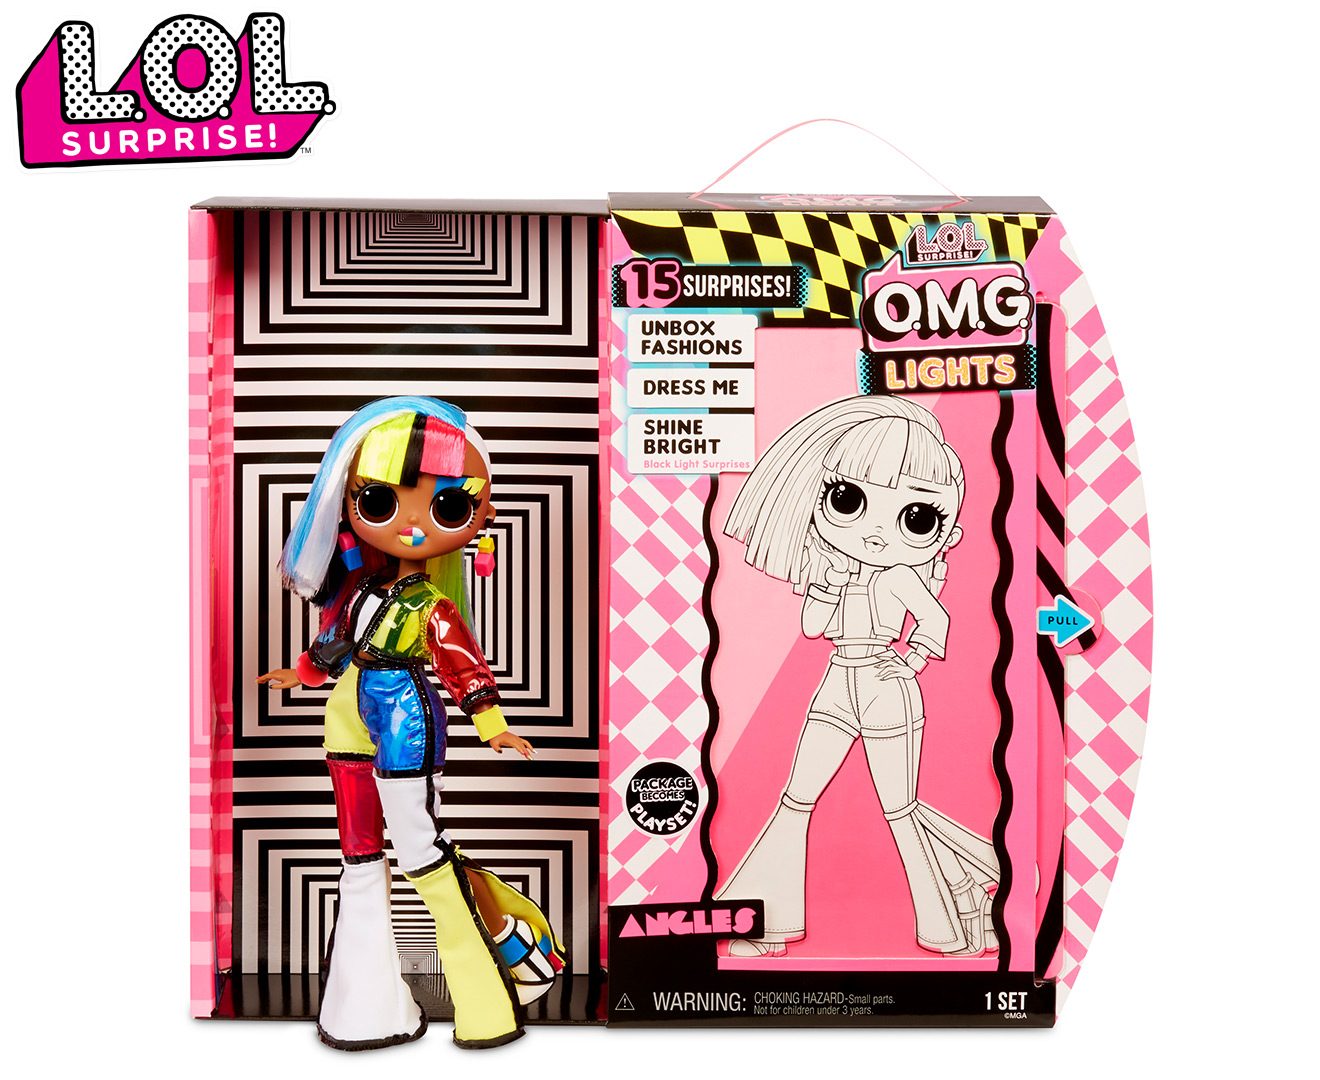 LOL Surprise! O.M.G. Lights Angles Fashion Doll with 15 Surprises - wide 8